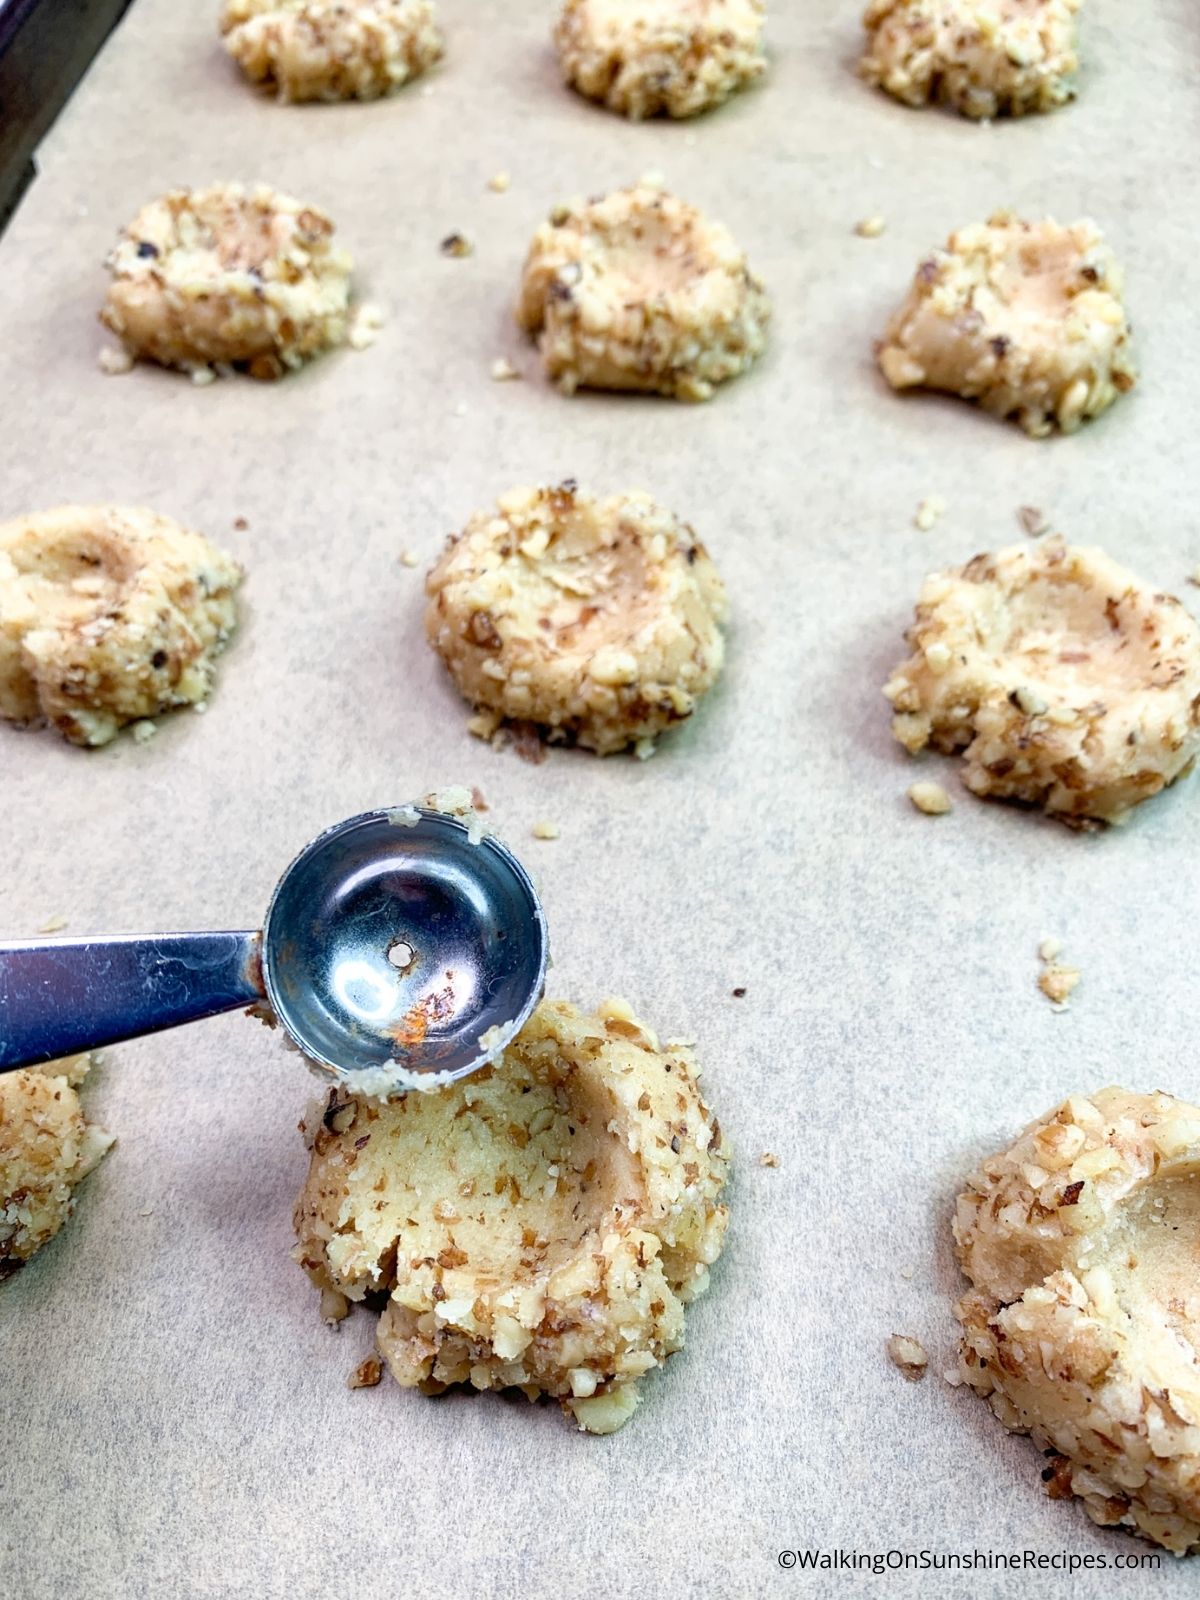 Add indentation to cookie balls with melon scoop.